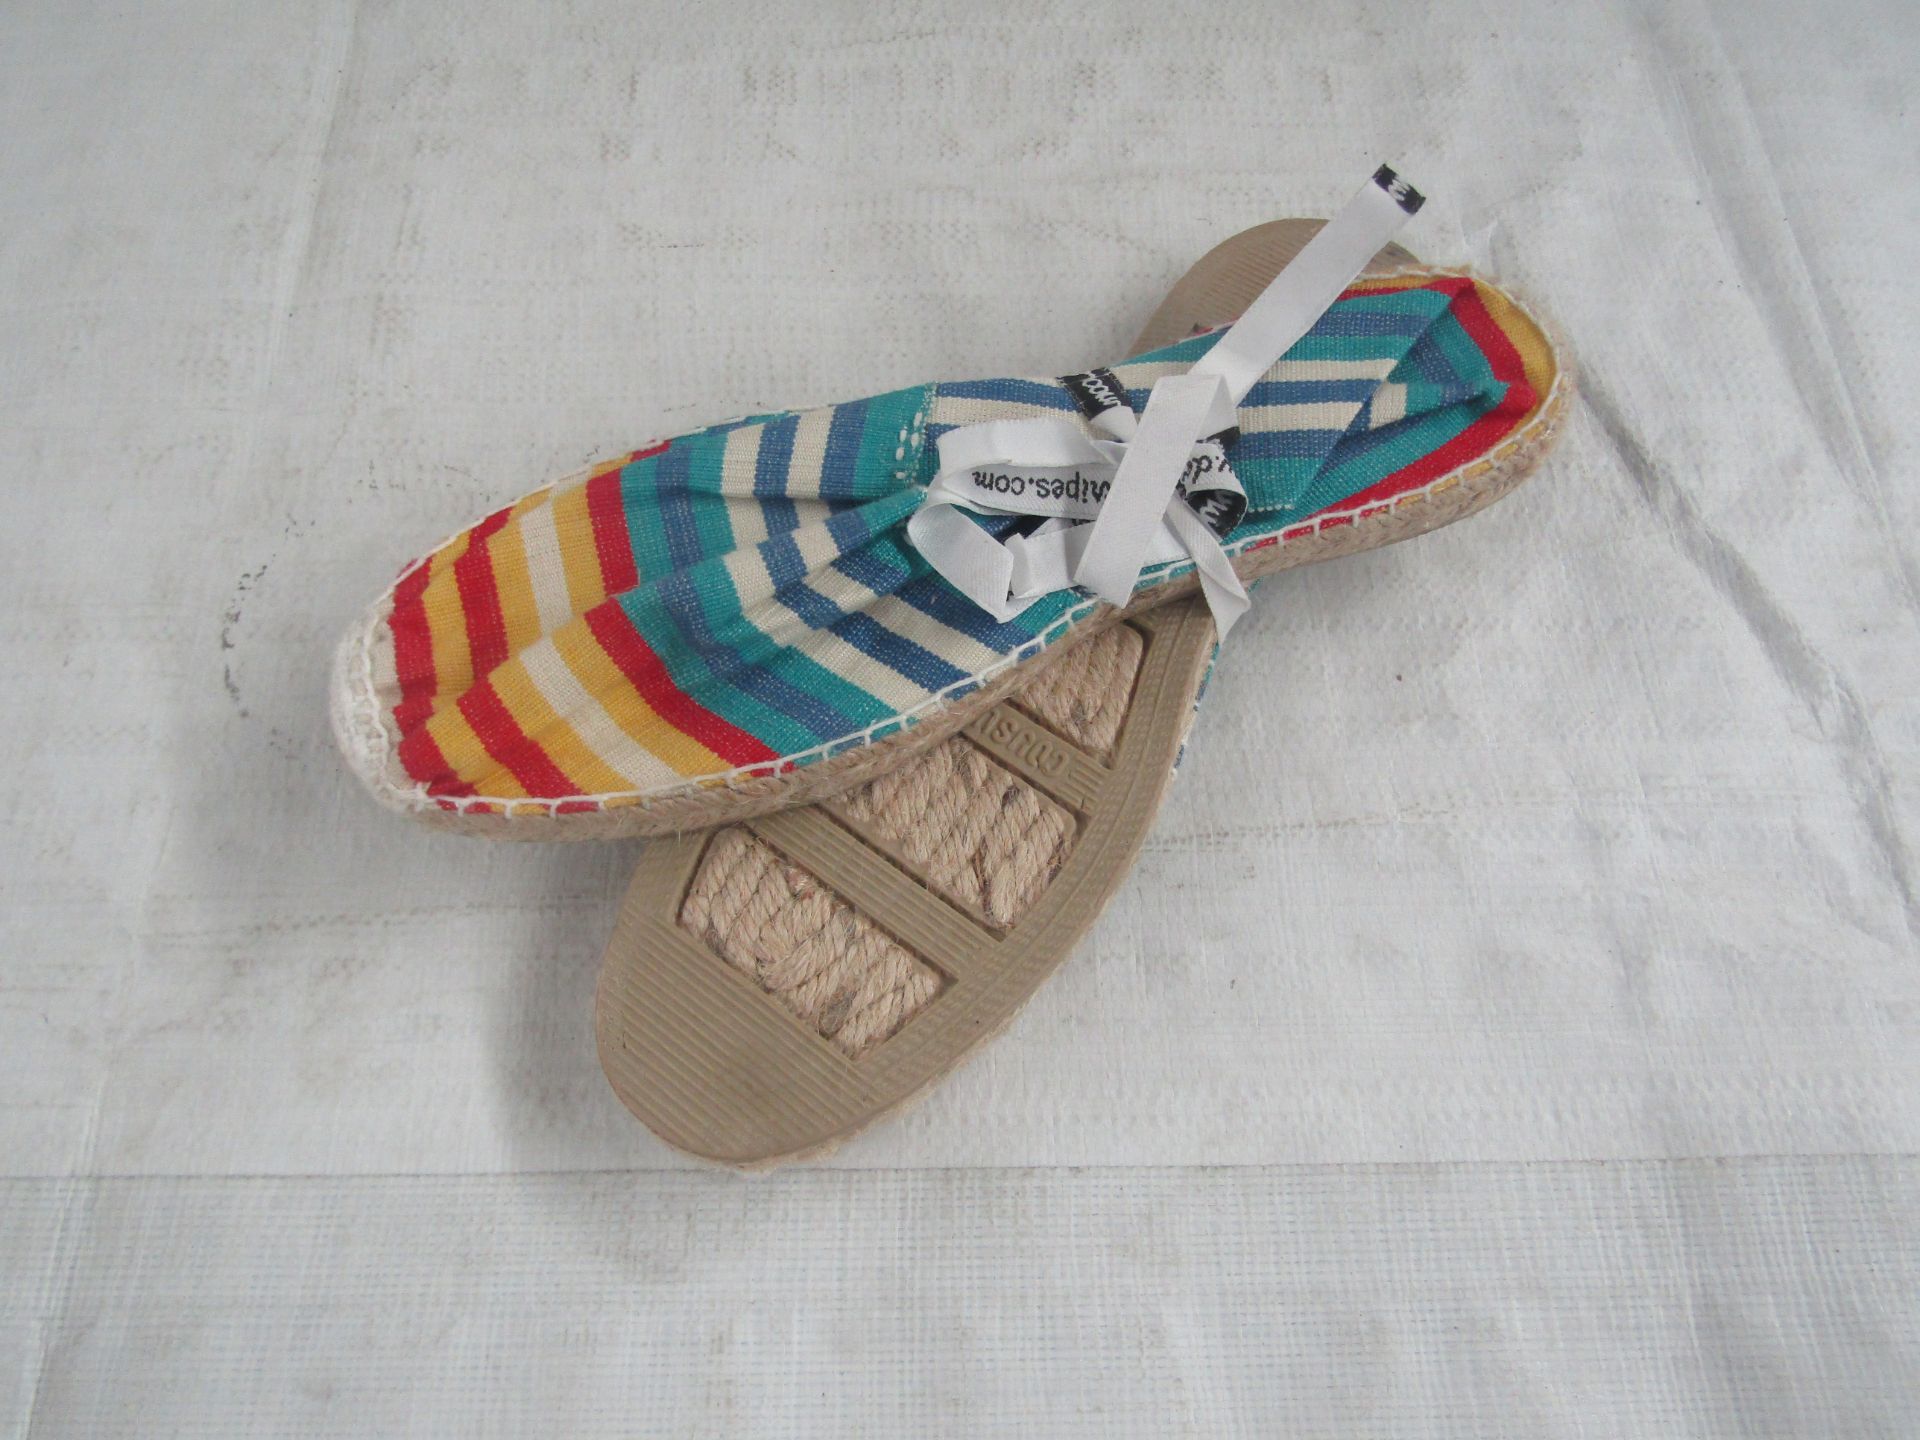 5X TheStripeCompany - Slip-On Espadrilles Shoes - See Image For Design - Size 42 - New.